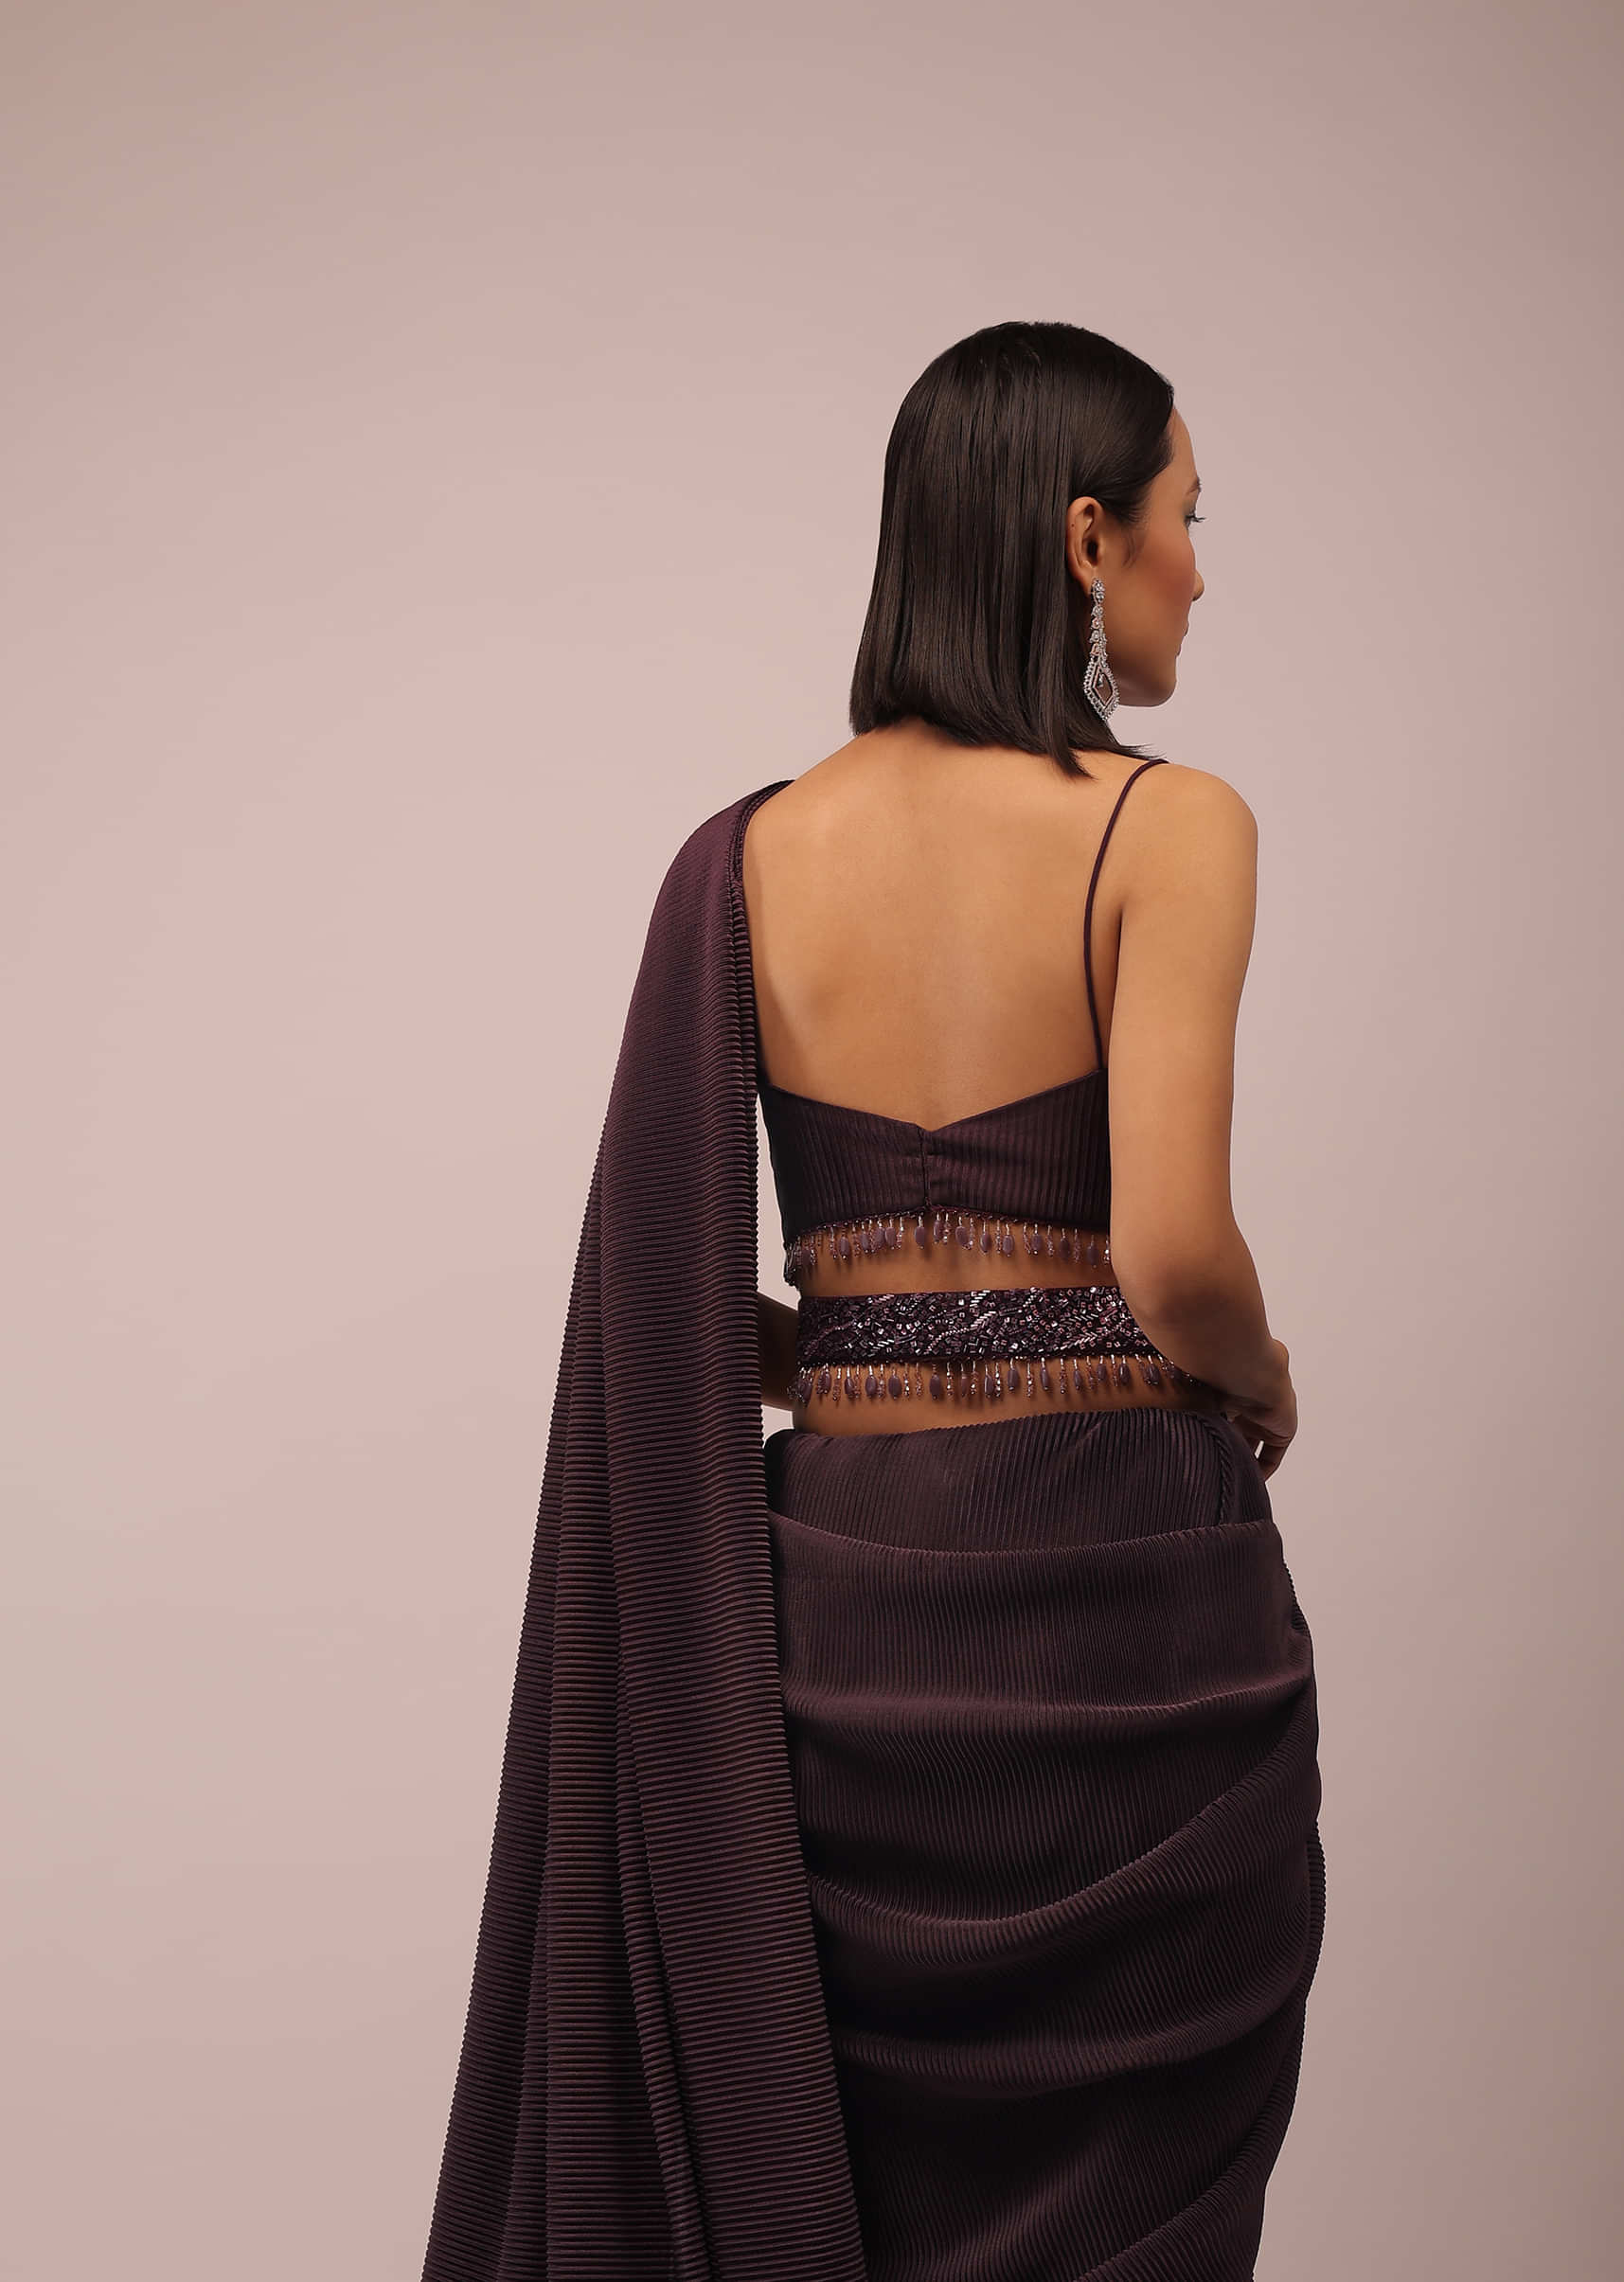 Plum Saree With Moti And Cut Dana Fringes Detailing On The Pallu And A Spaghetti Straps Crop Top With An Embroidered Belt In Fringes